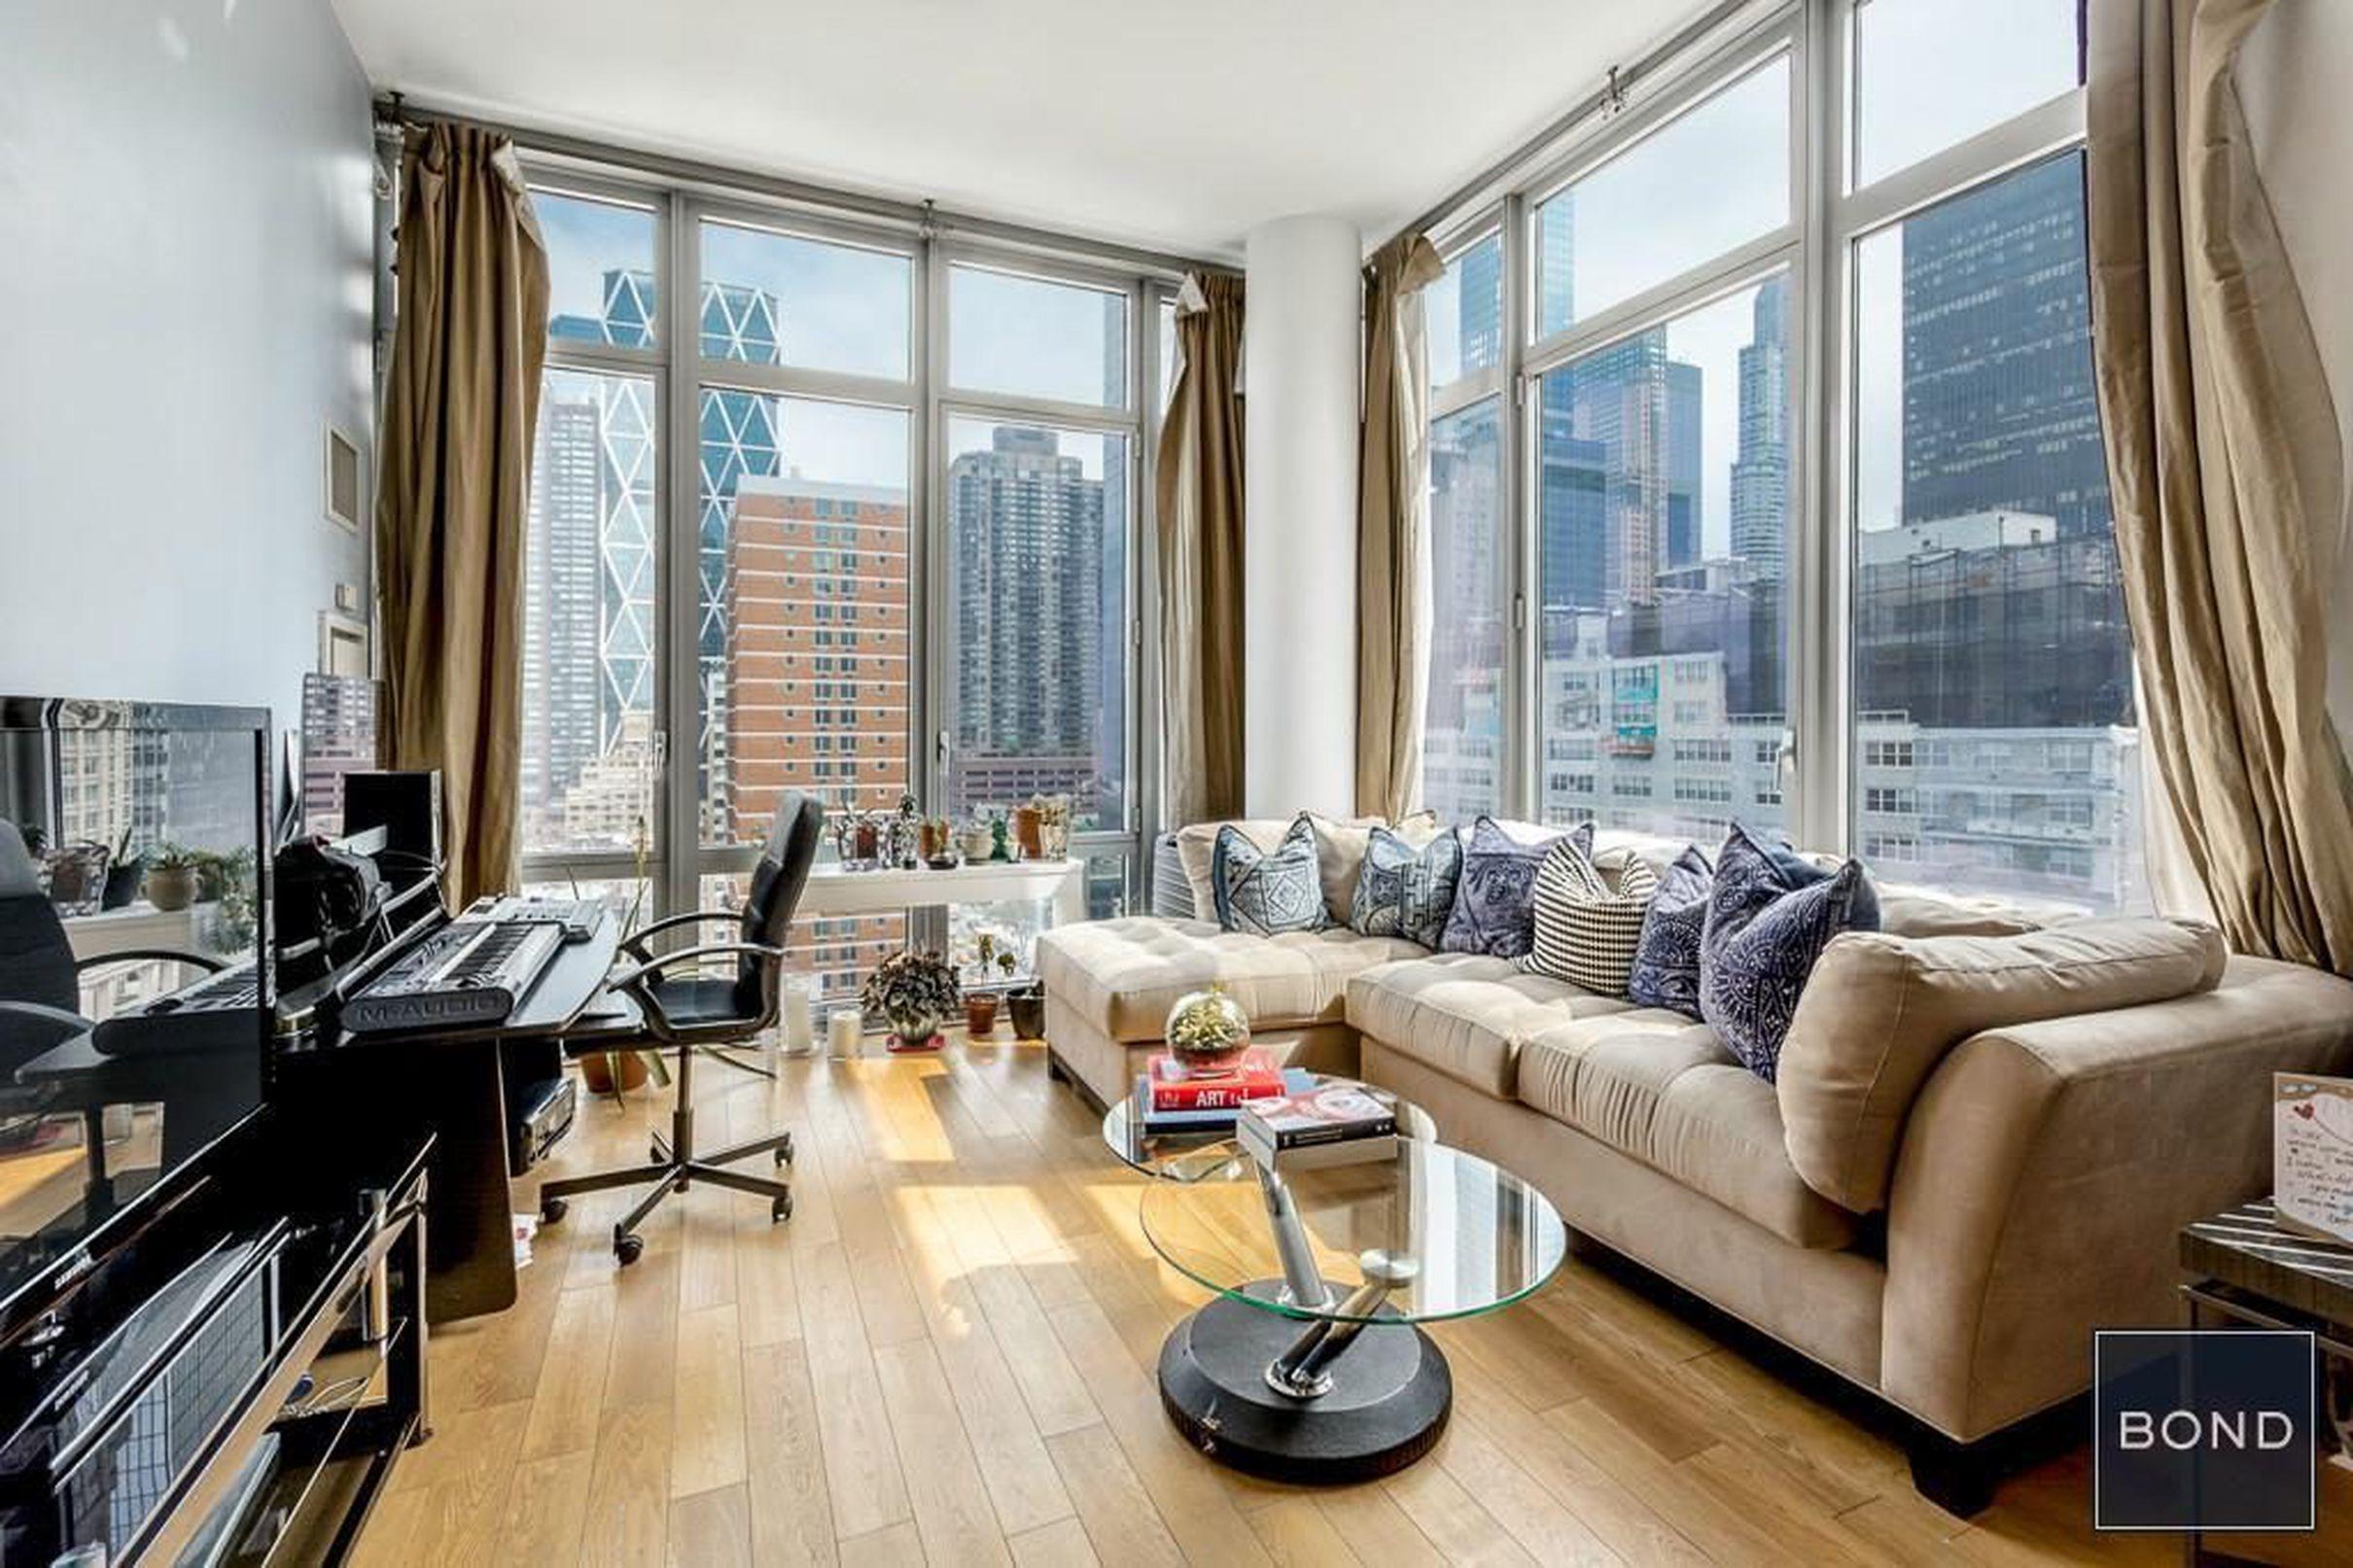 How much to rent an apartment in new york